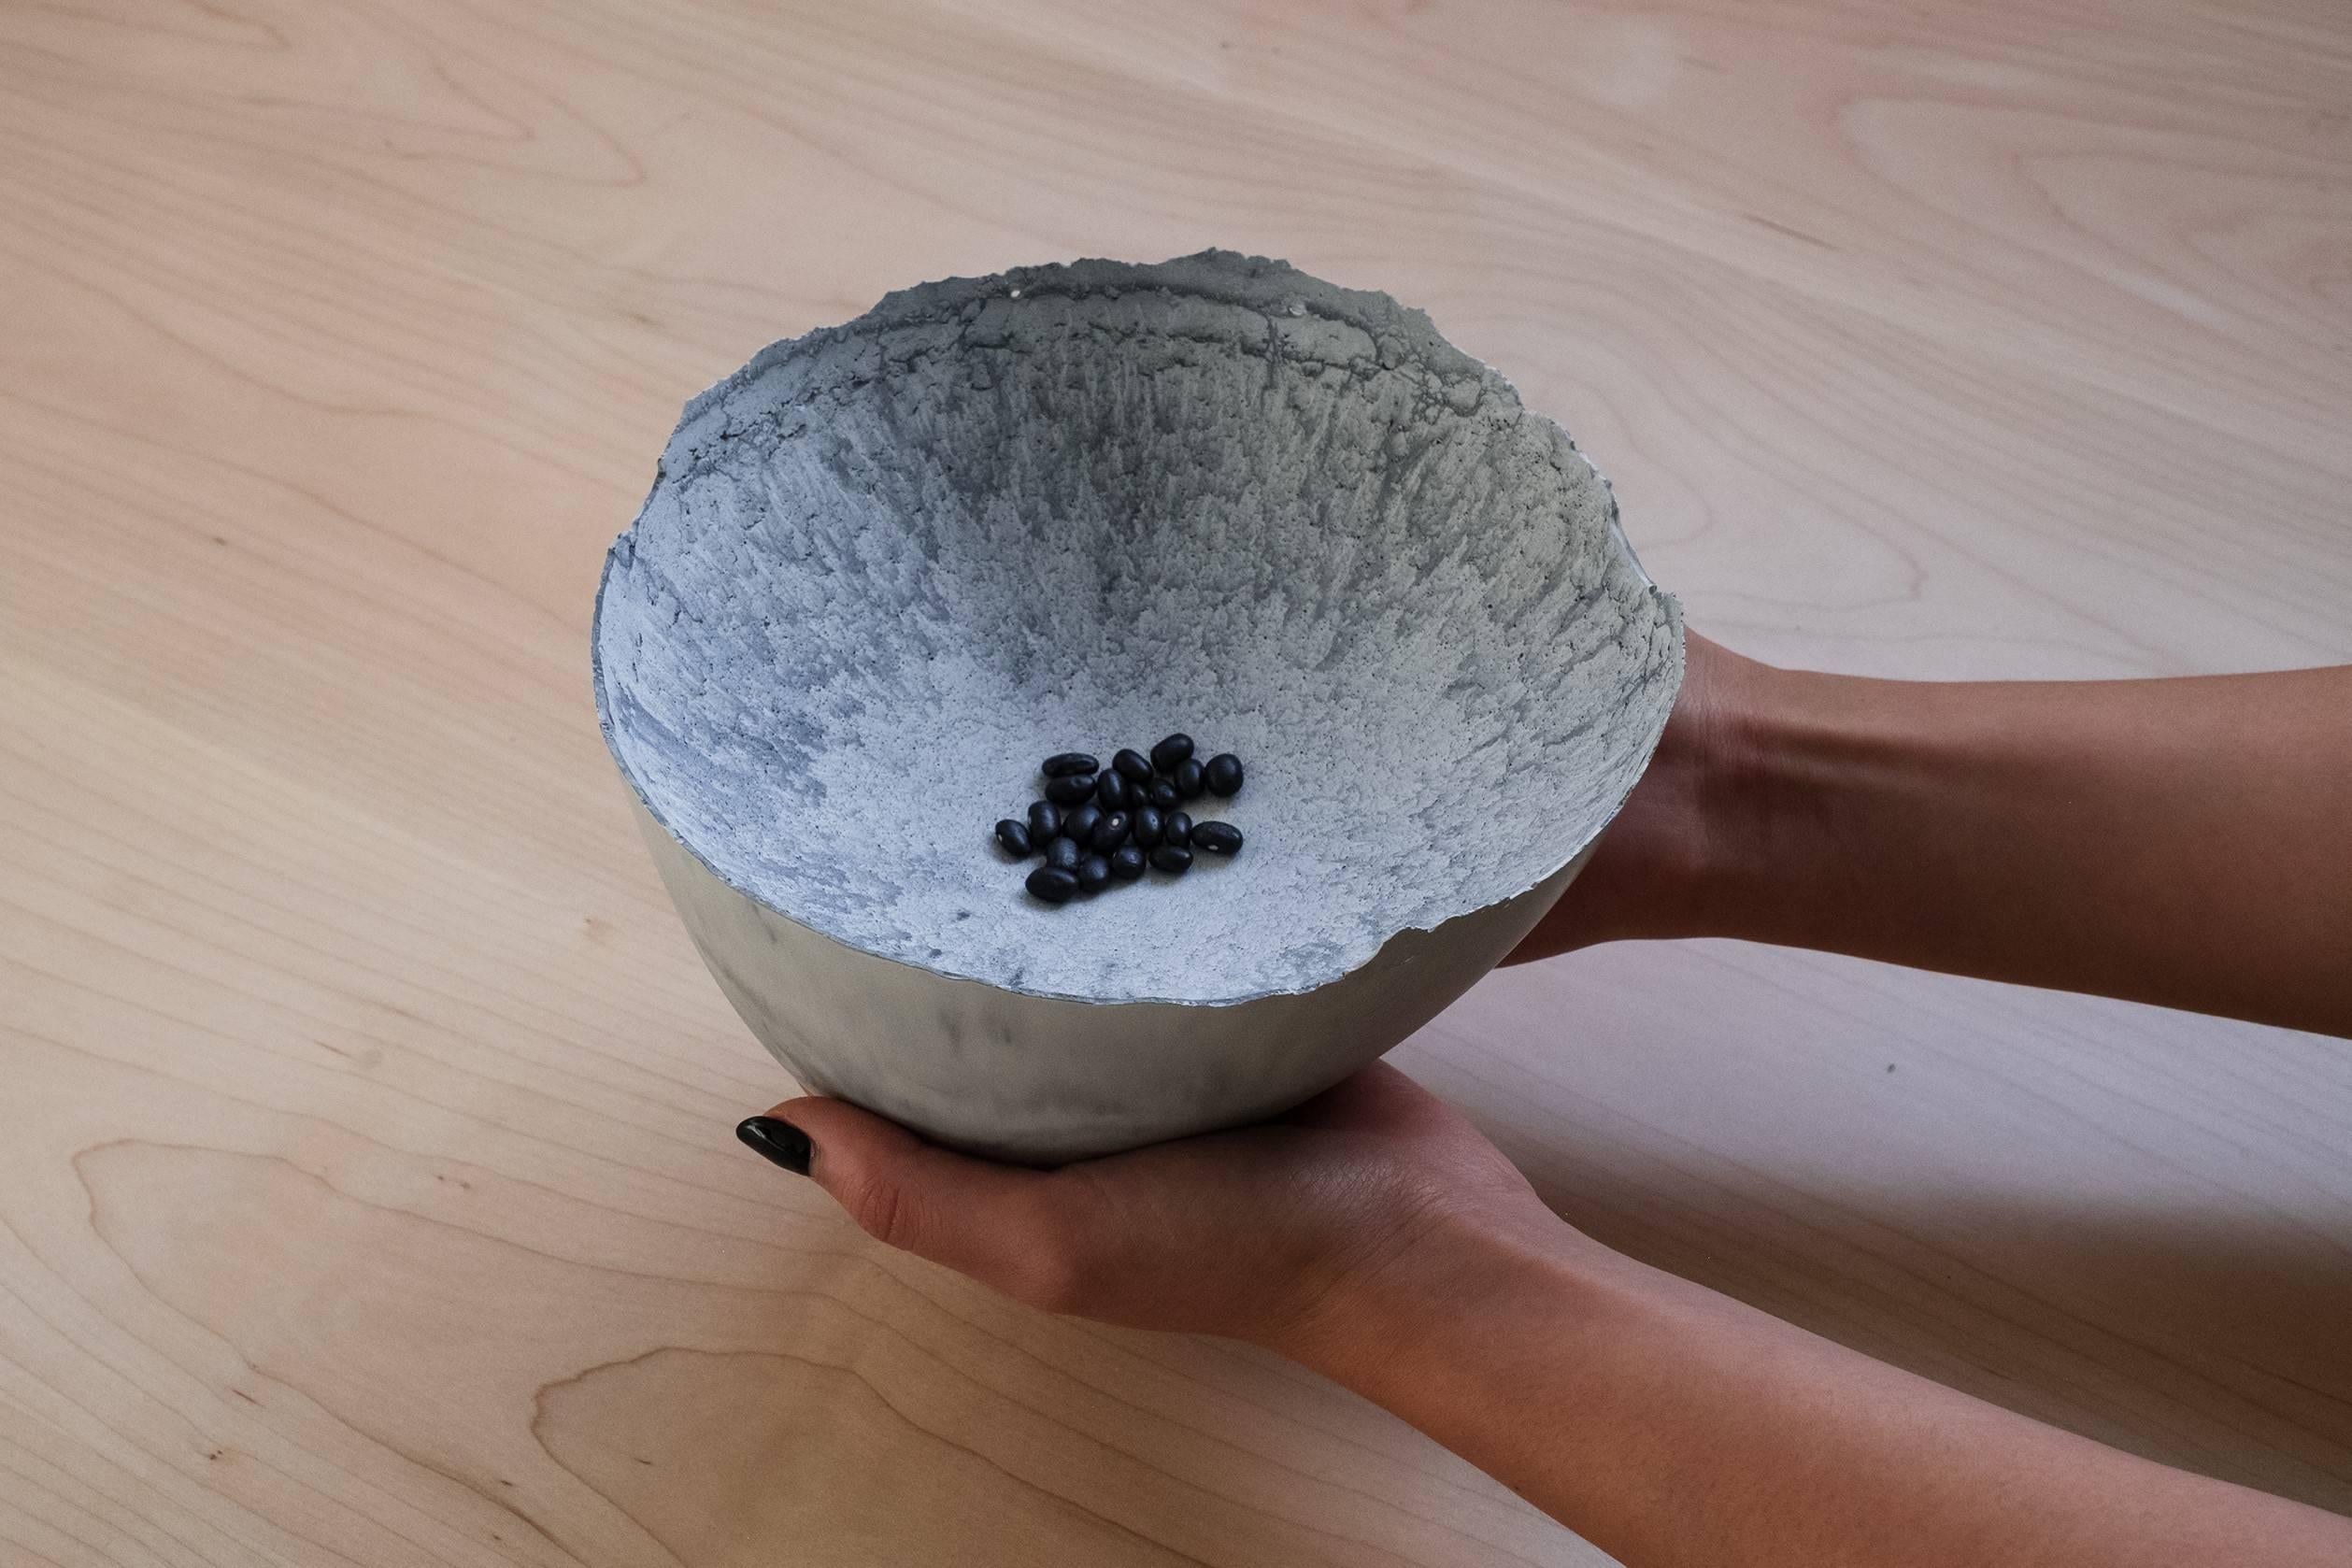 A collection of 200 unique bowls, the Concrete Series by UMÉ Studio expresses the tension between heavy concrete and its delicate edge generated by hand pouring. While one assumes concrete should be strong and durable, it is, at its core, fragile.